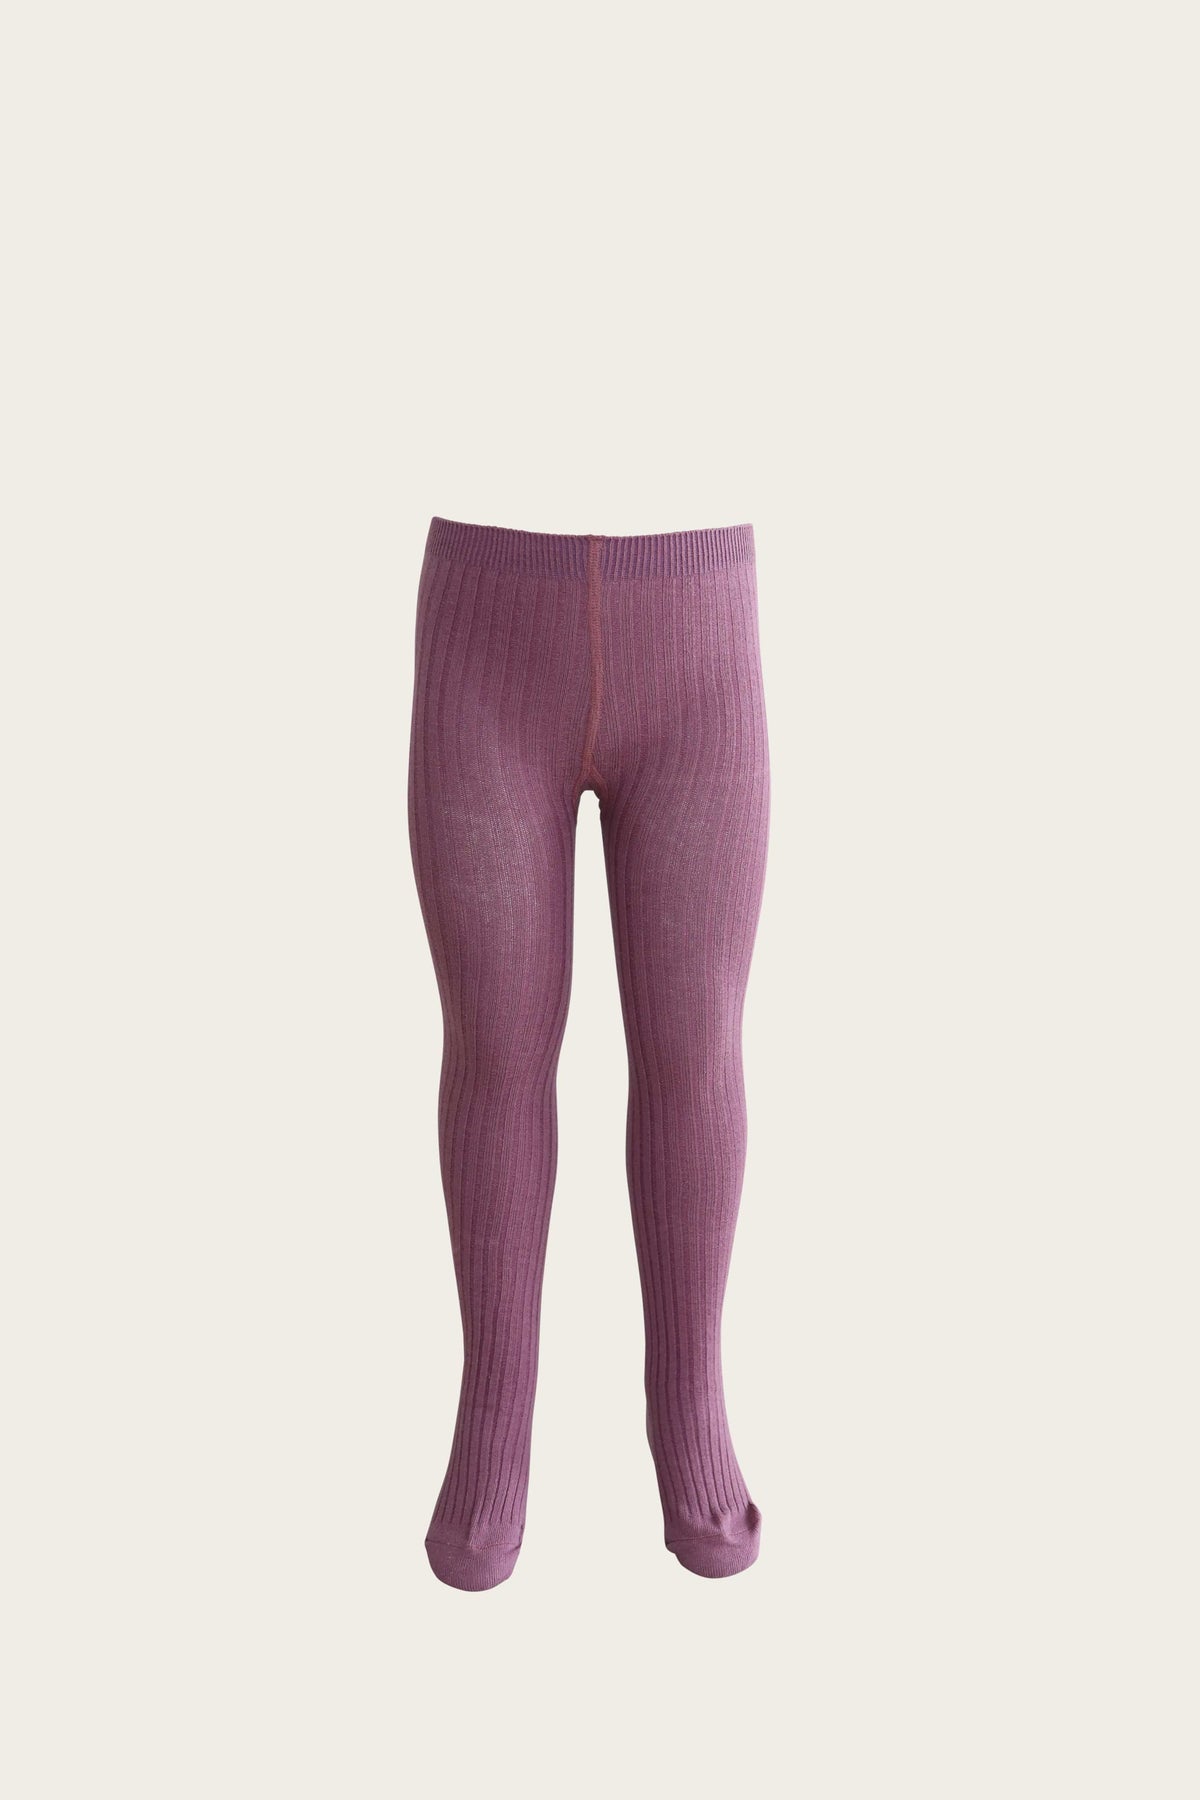 Ribbed Tights - Tulip - Child Boutique